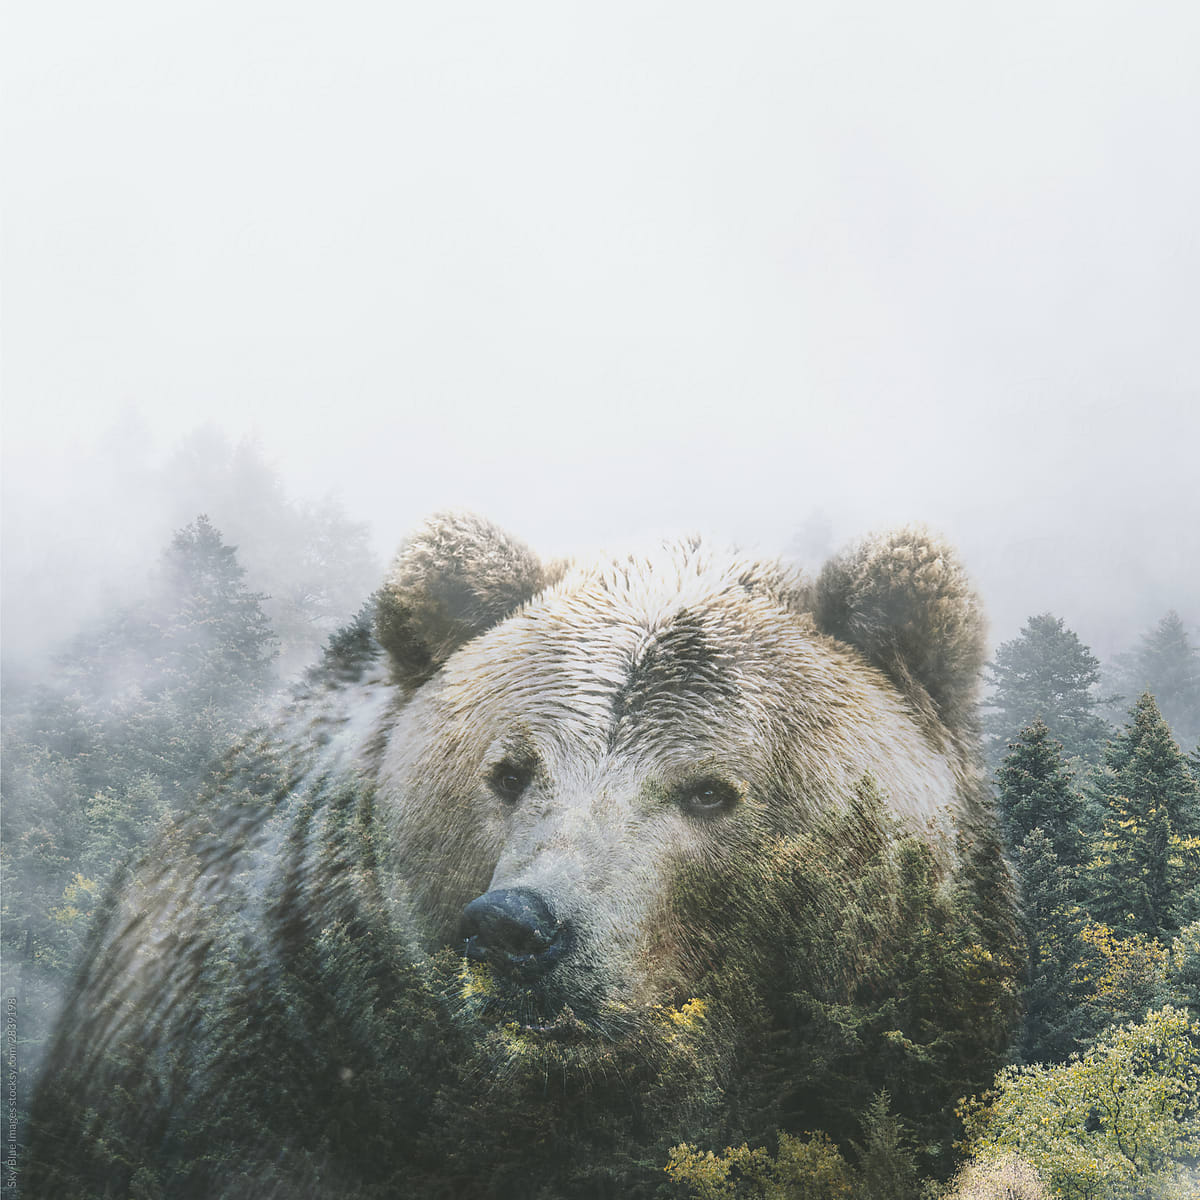 Multiple exposures of forest animals: Bear